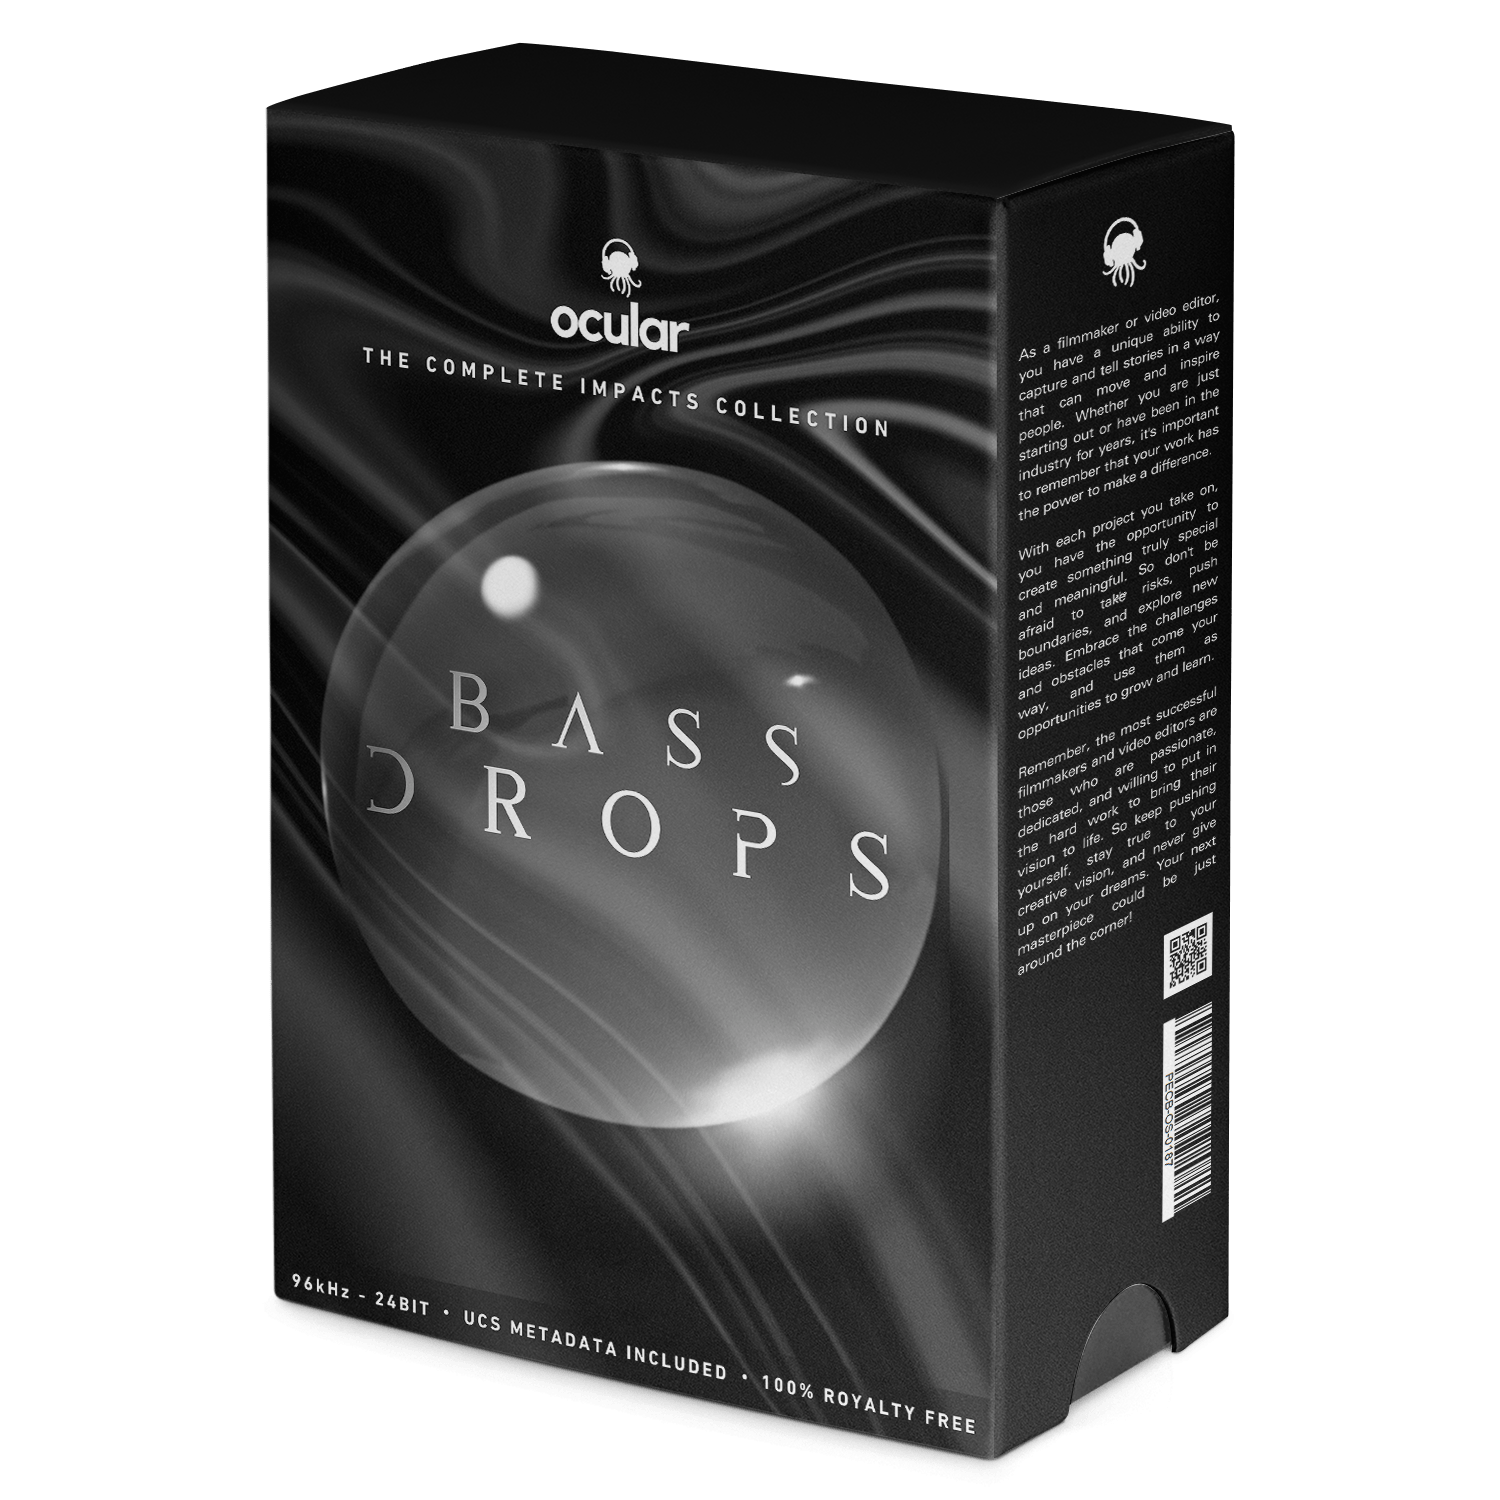 Bass Drops Sound Effects for Video Editing. Professional Sound FX Library.